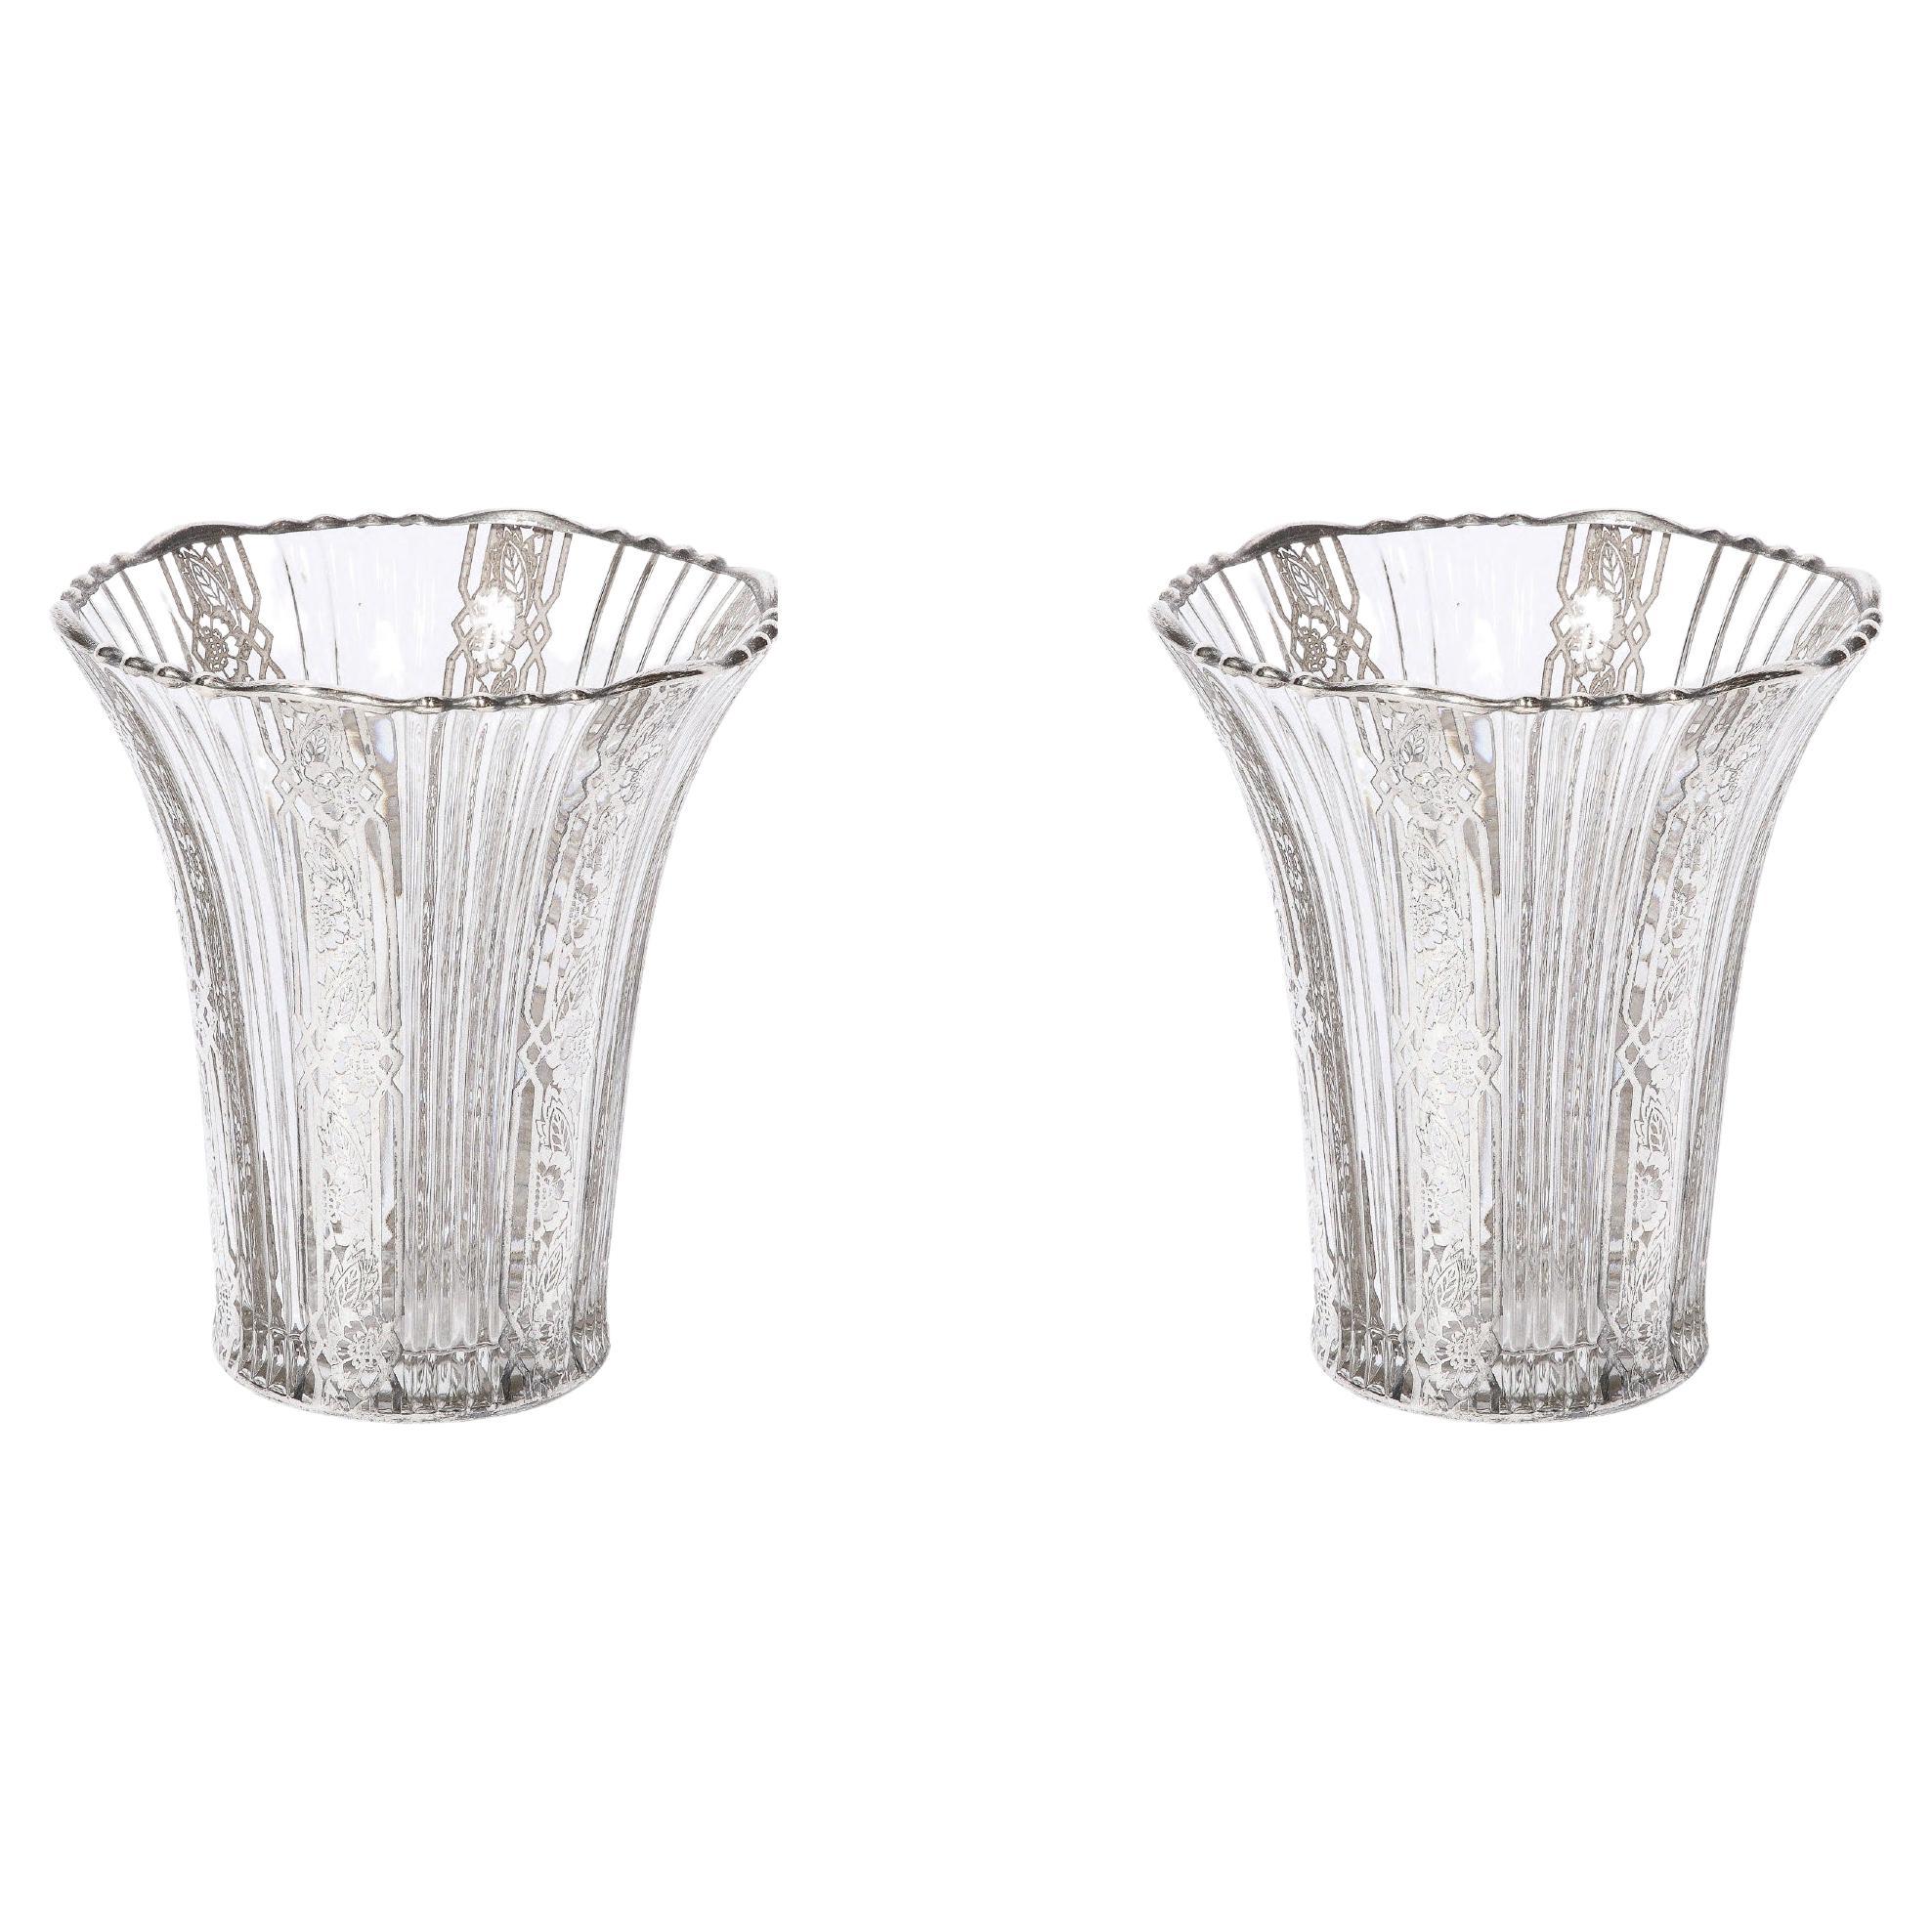 Pair of Art Deco Fluted Vases w/ Cubist  Sterling Silver Overlay